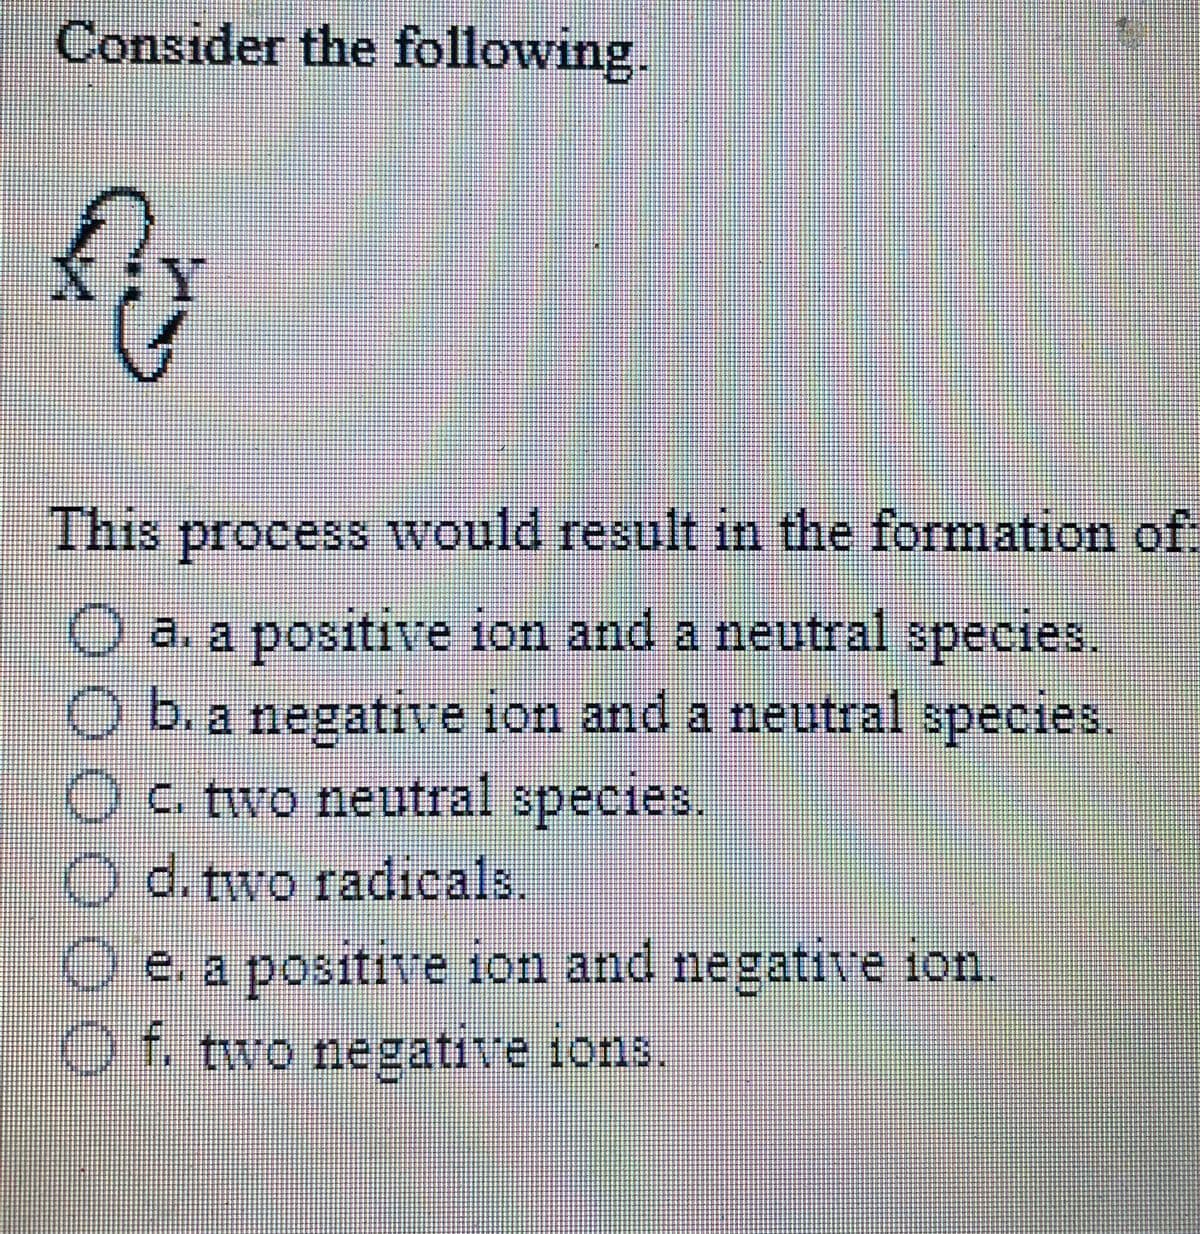 Consider the following.
This
process would result in the formation of
O a. a positive ion and a neutral species.
b. a negative ion and a neutral species,
Oc two neutral species.
O d. two radicals.
e. a positive ion and negative ion.
Of two negative 1ons.
